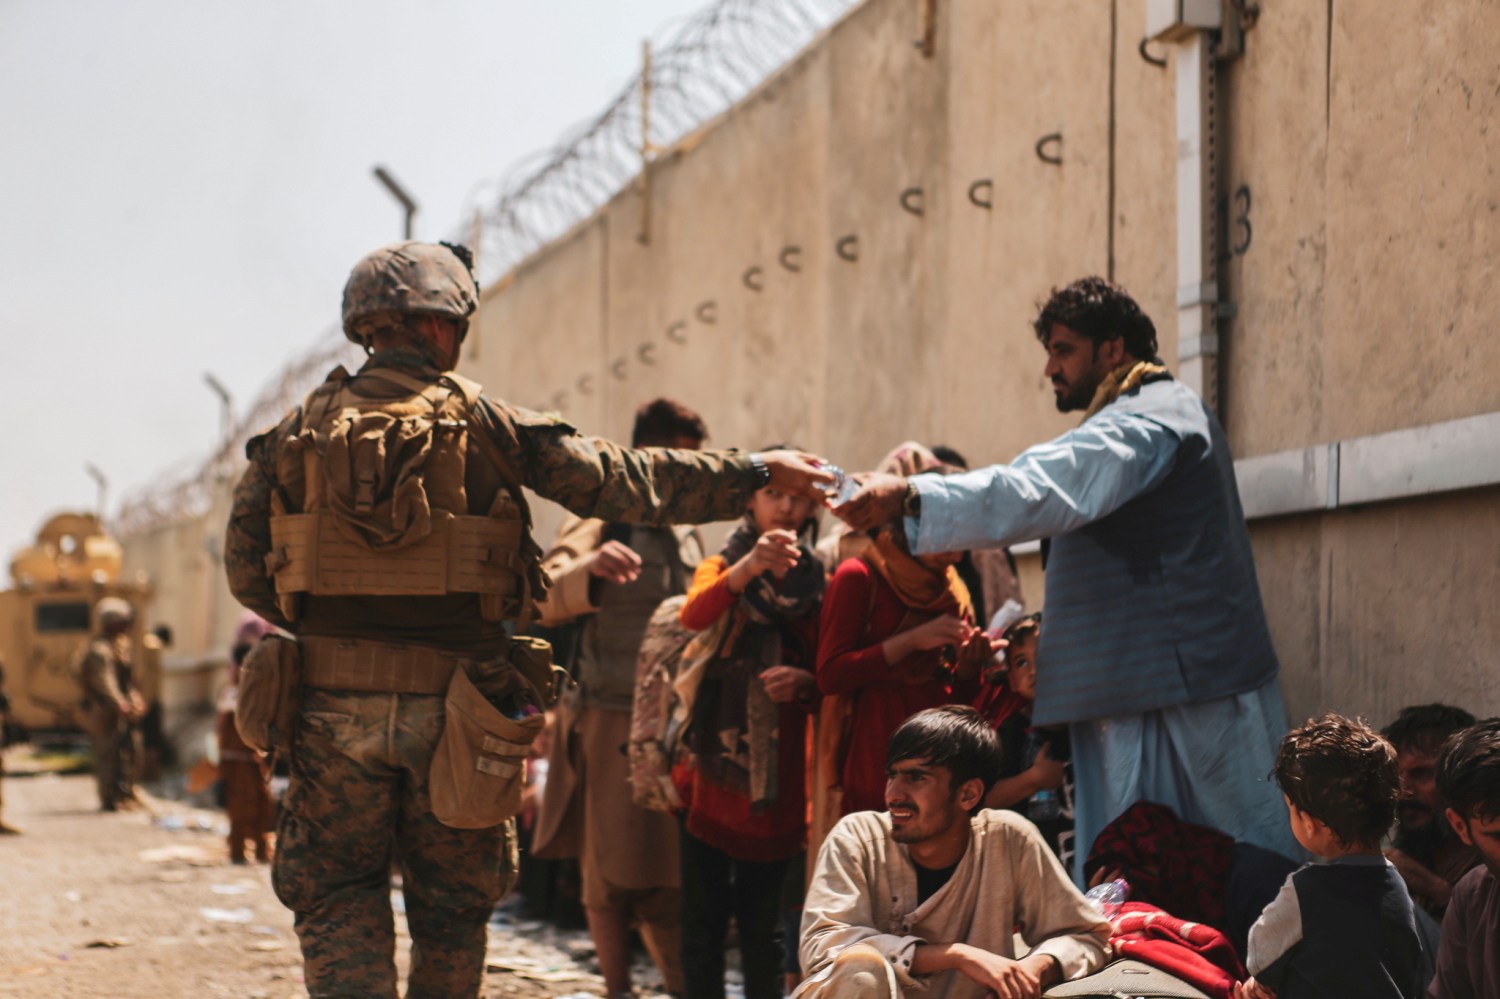 FILE PHOTO: A U.S. Marine passes out water to evacuees during an evacuation at Hamid Karzai International Airport, Kabul, Afghanistan, August 22, 2021. Picture taken August 22, 2021.  U.S. Marine Corps/Sgt. Isaiah Campbell/Handout via REUTERS THIS IMAGE HAS BEEN SUPPLIED BY A THIRD PARTY./File Photo